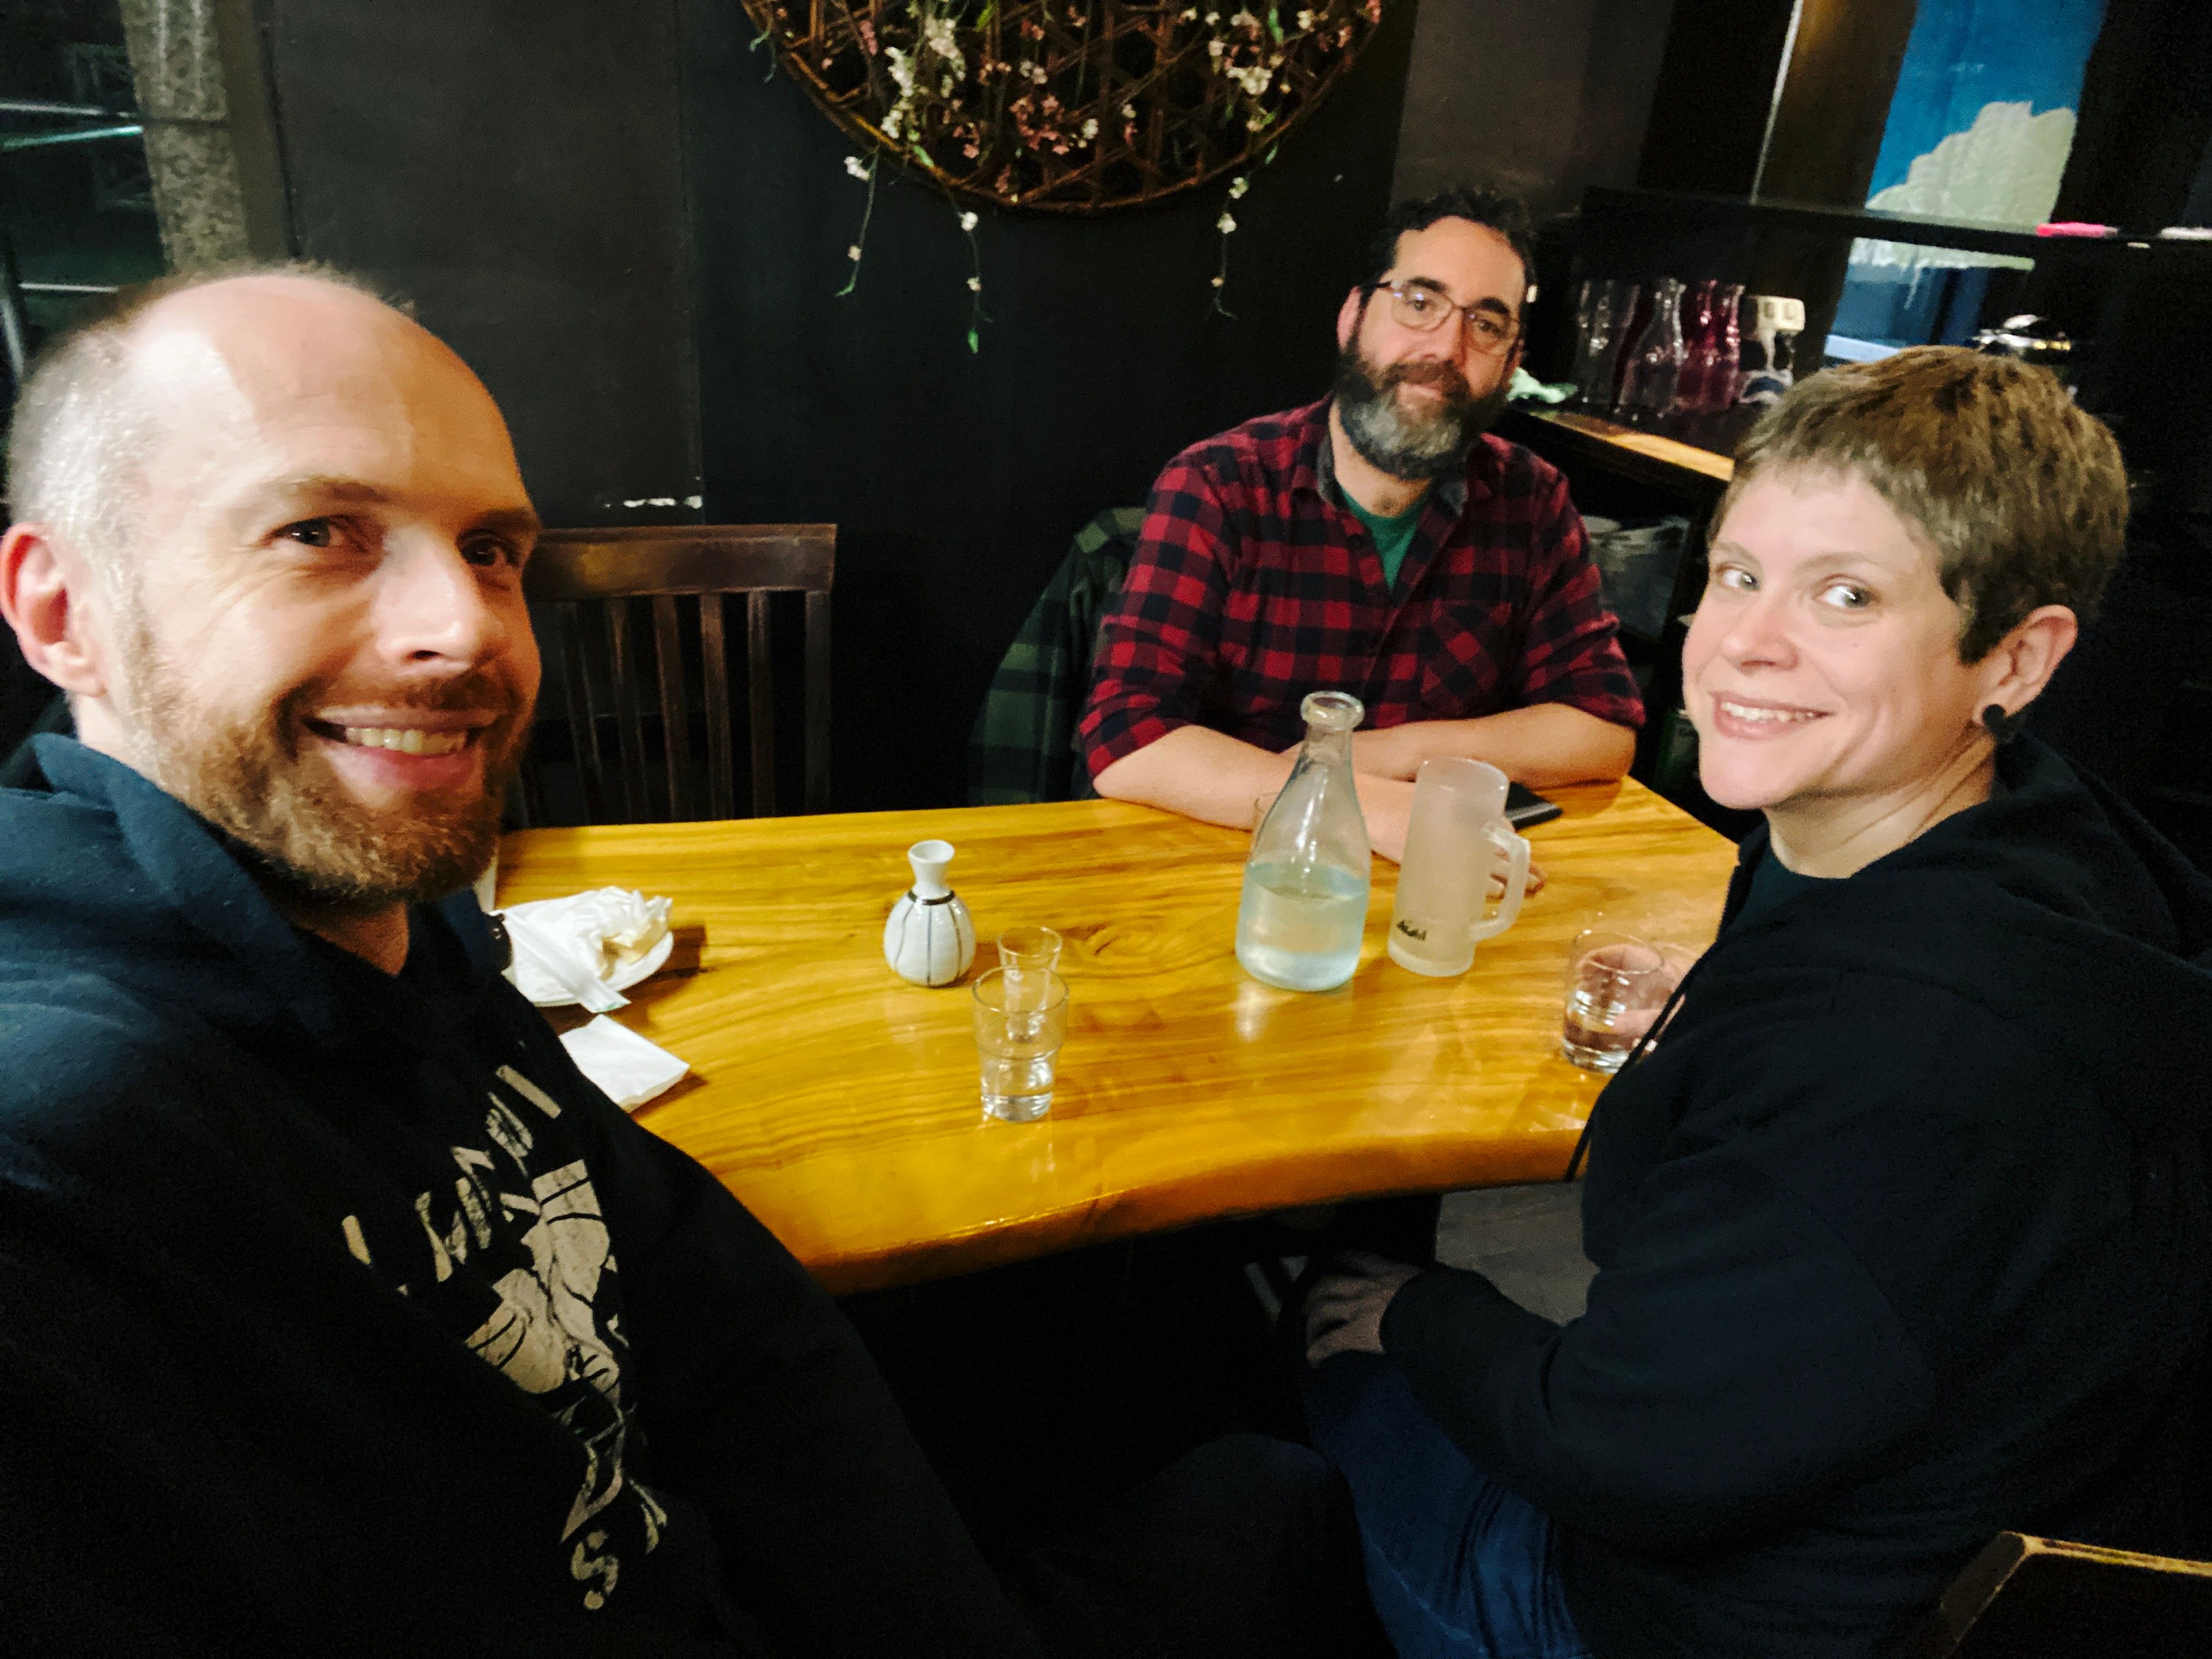 A selfie of three people sitting around a dining table. There's me, a white man with a red beard and short brown hair, Pete, a white man with slightly longer brown hair and a much larger brown beard, and Kristina, a white woman with short brown hair. We're all smiling at the camera.